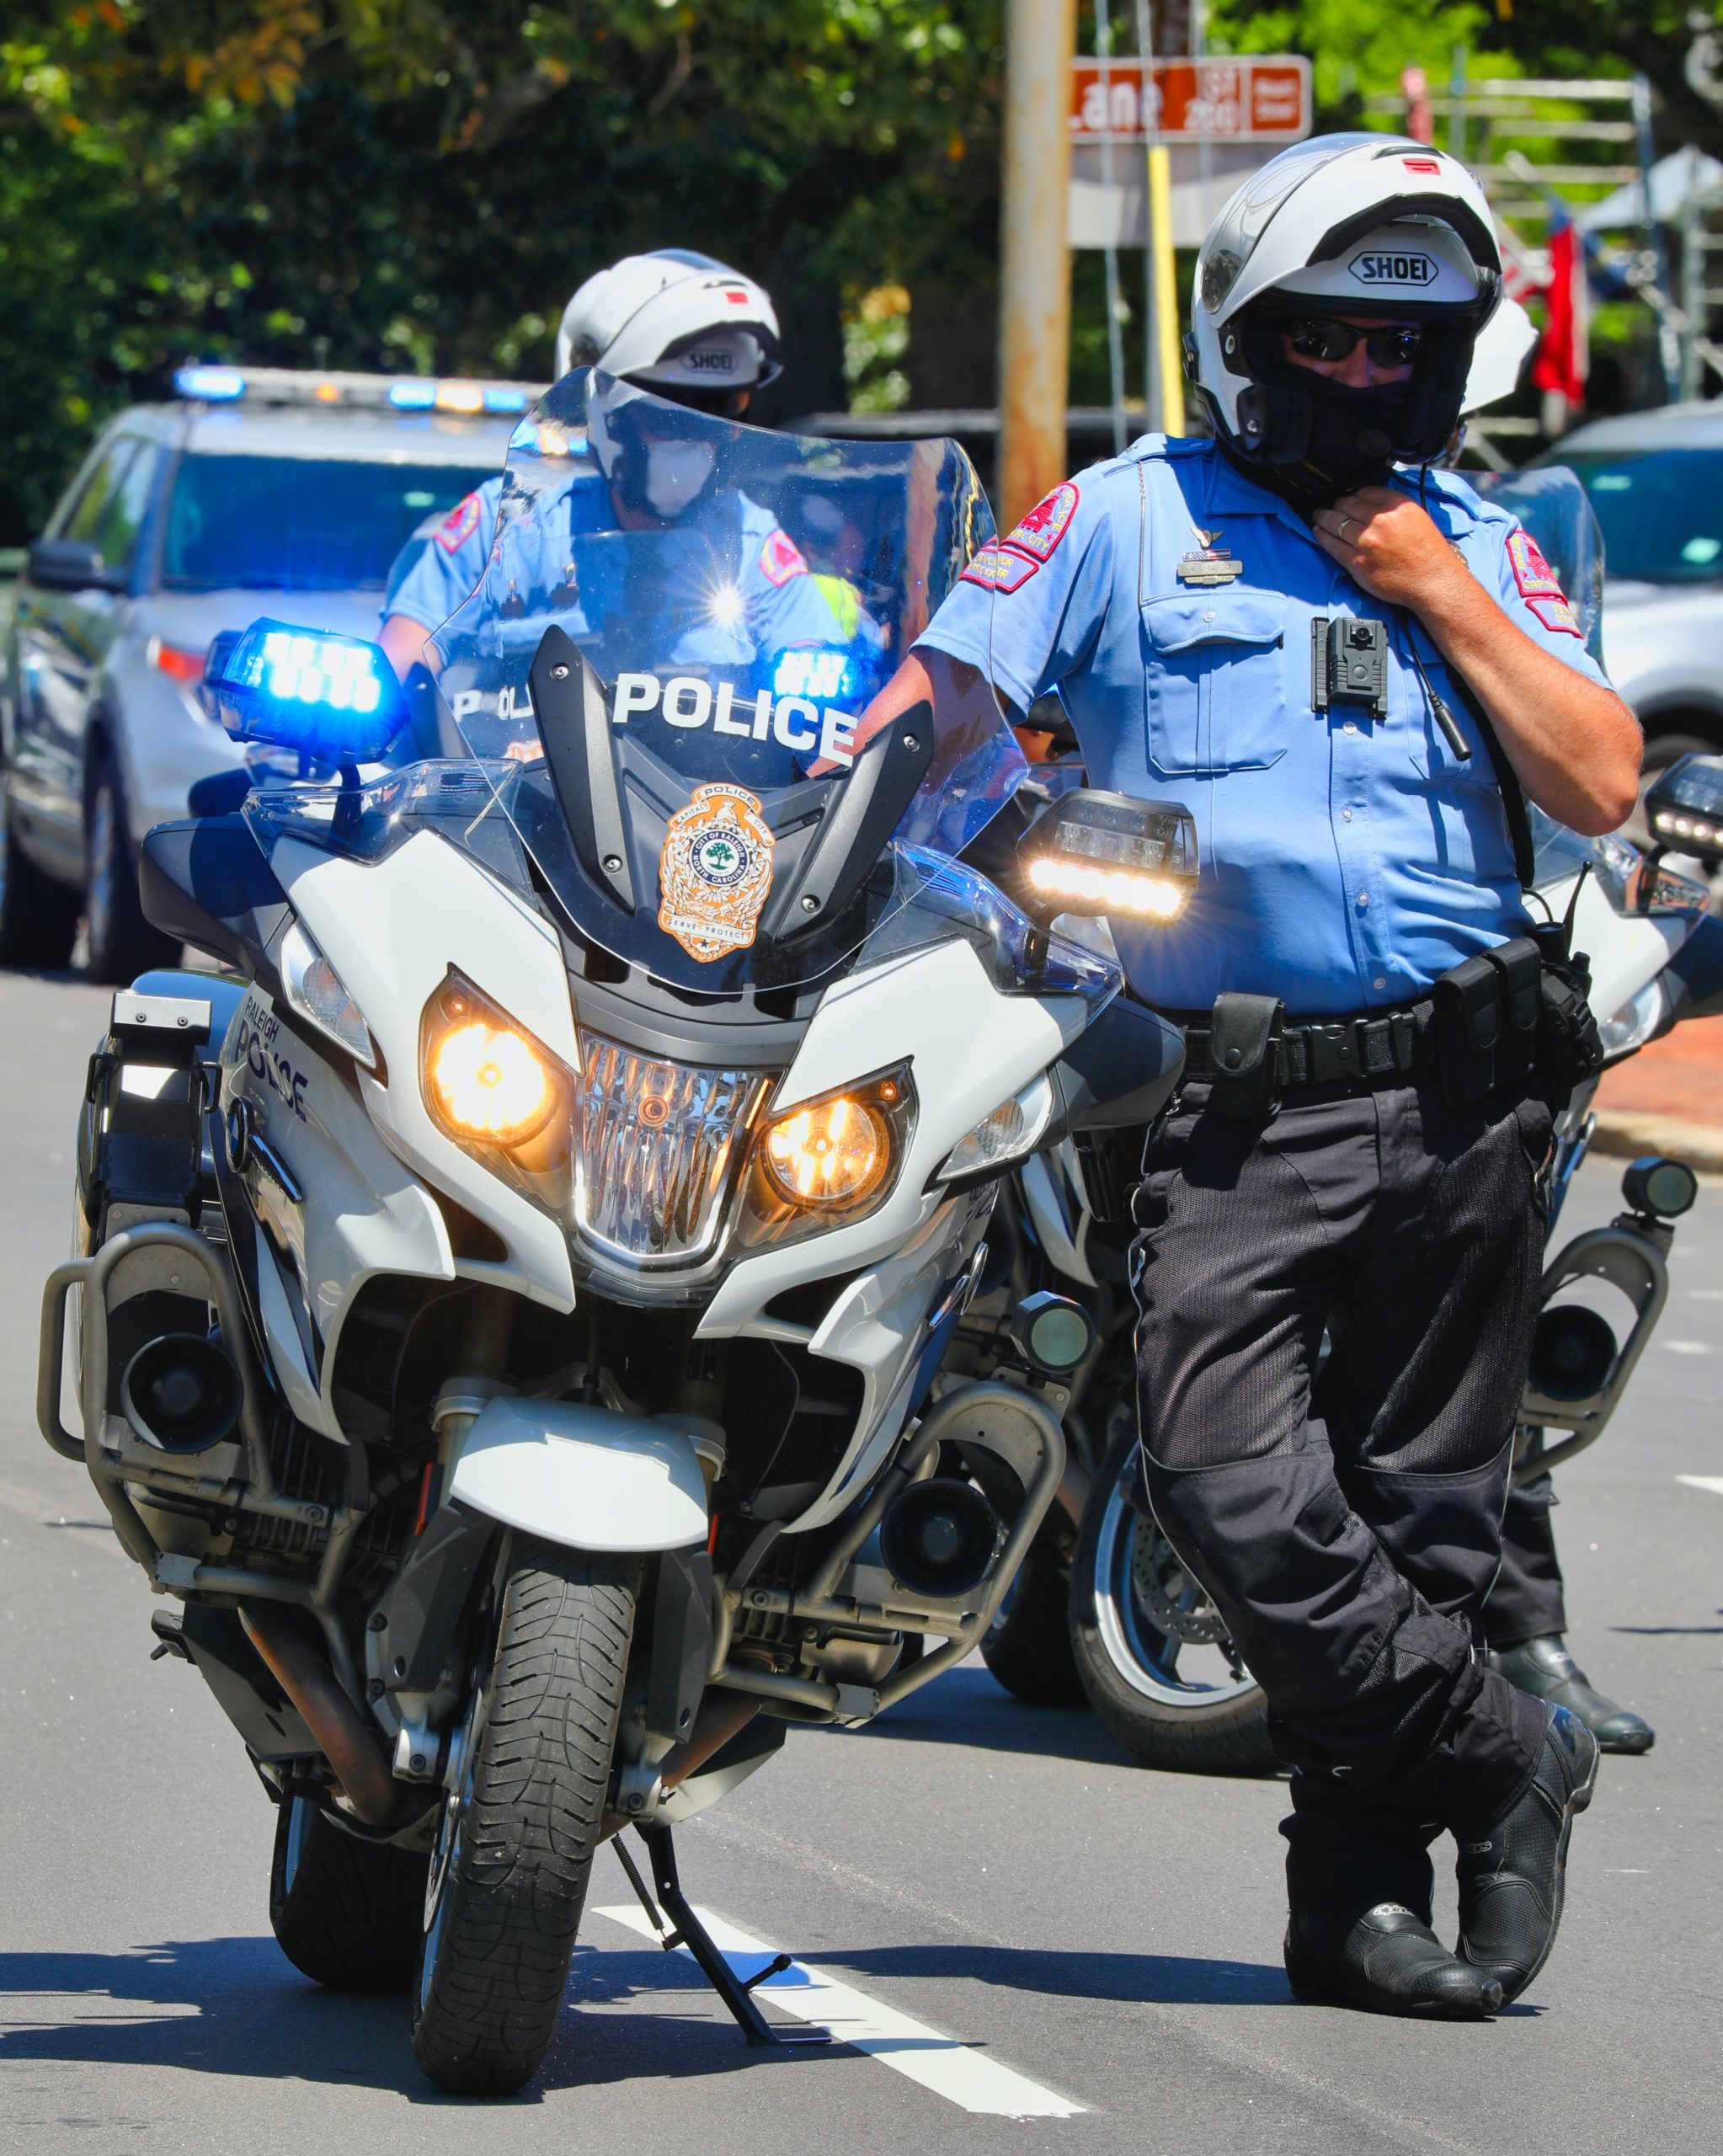 police officer next to motorcycle